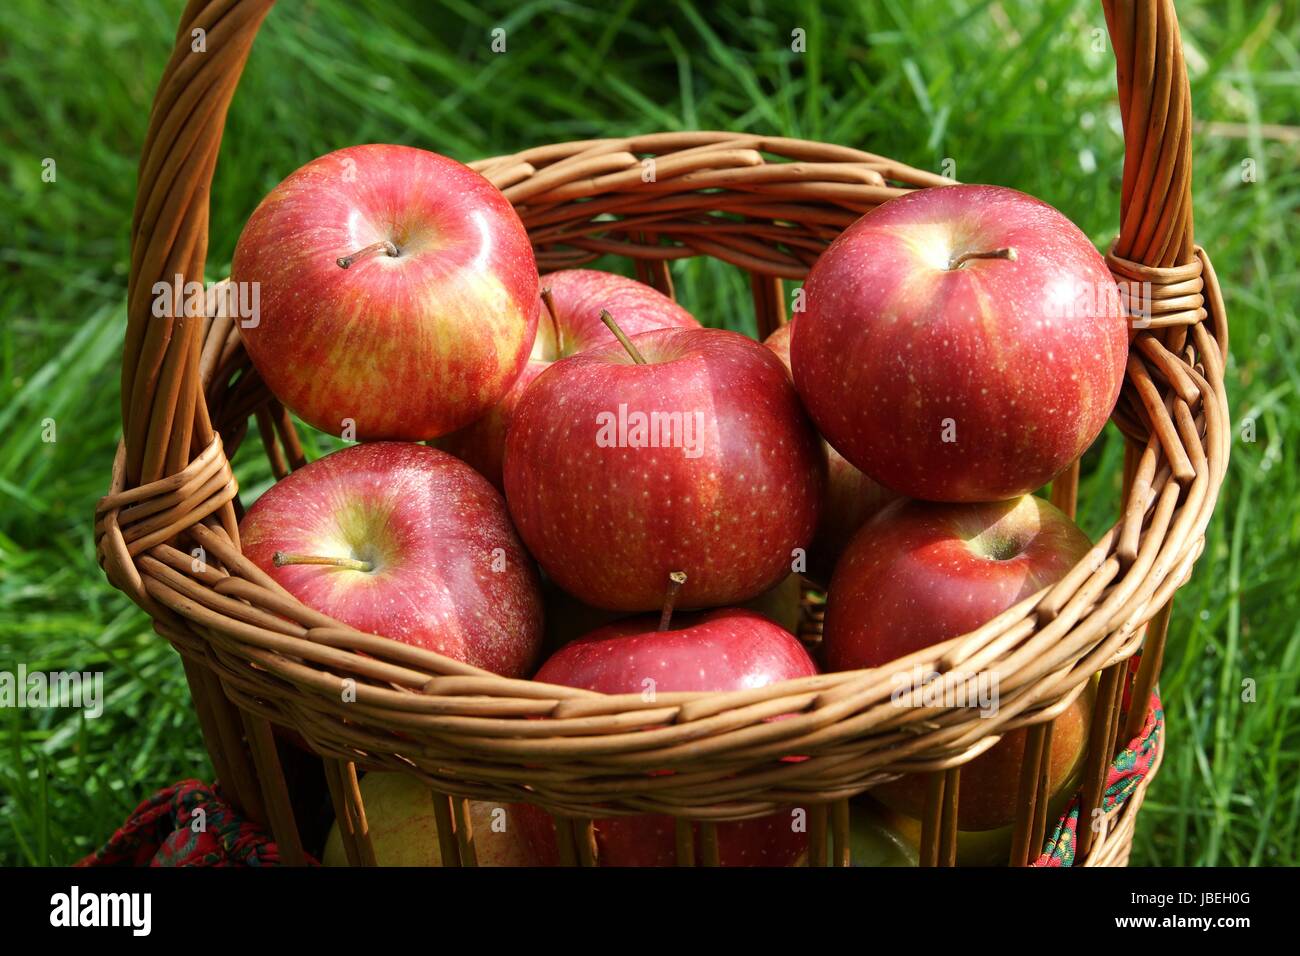 basket with red apples Stock Photo